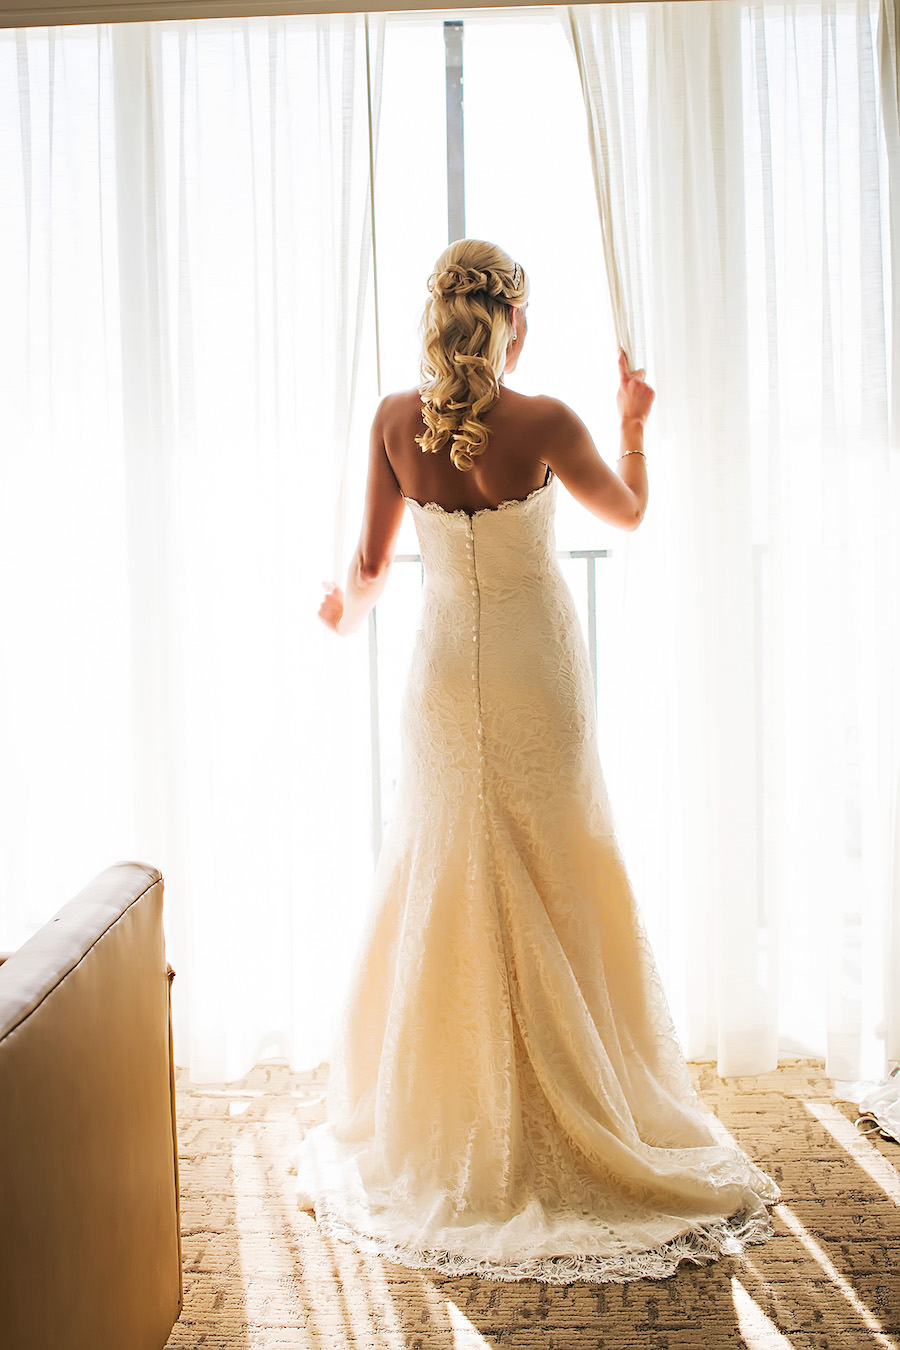 Bridal Wedding Portrait in Window in Strapless, Ivory, Lace Wedding Dress | Clearwater Wedding Photographer Limelight Photography